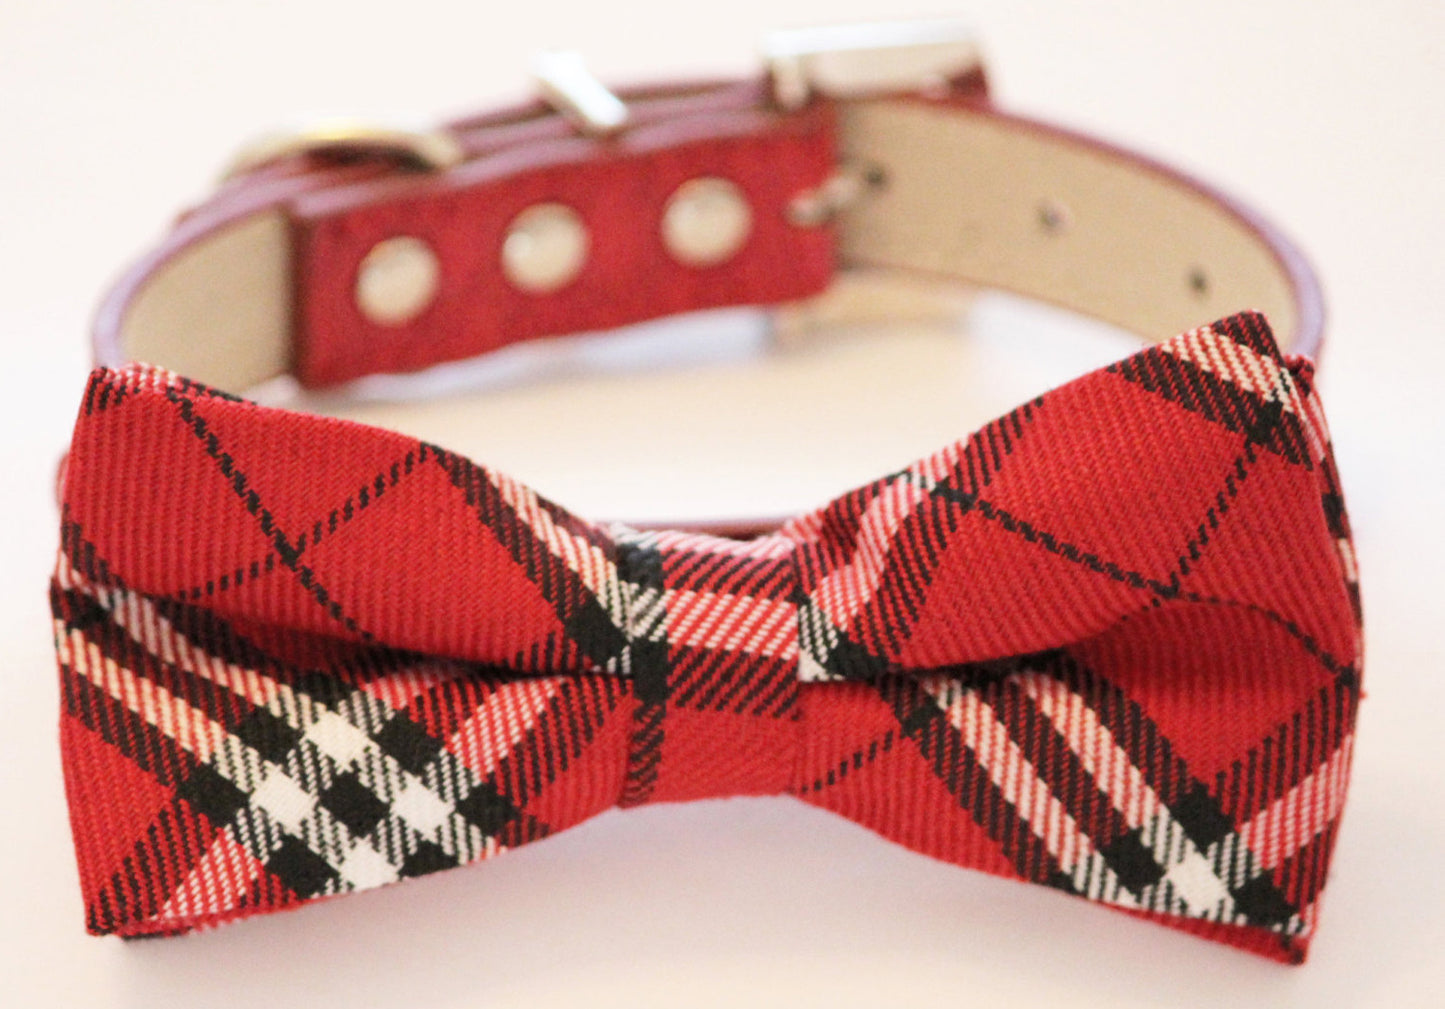 Plaid red and white wedding Dog Bow tie with collar, Chic and Elegant wedding , Wedding dog collar